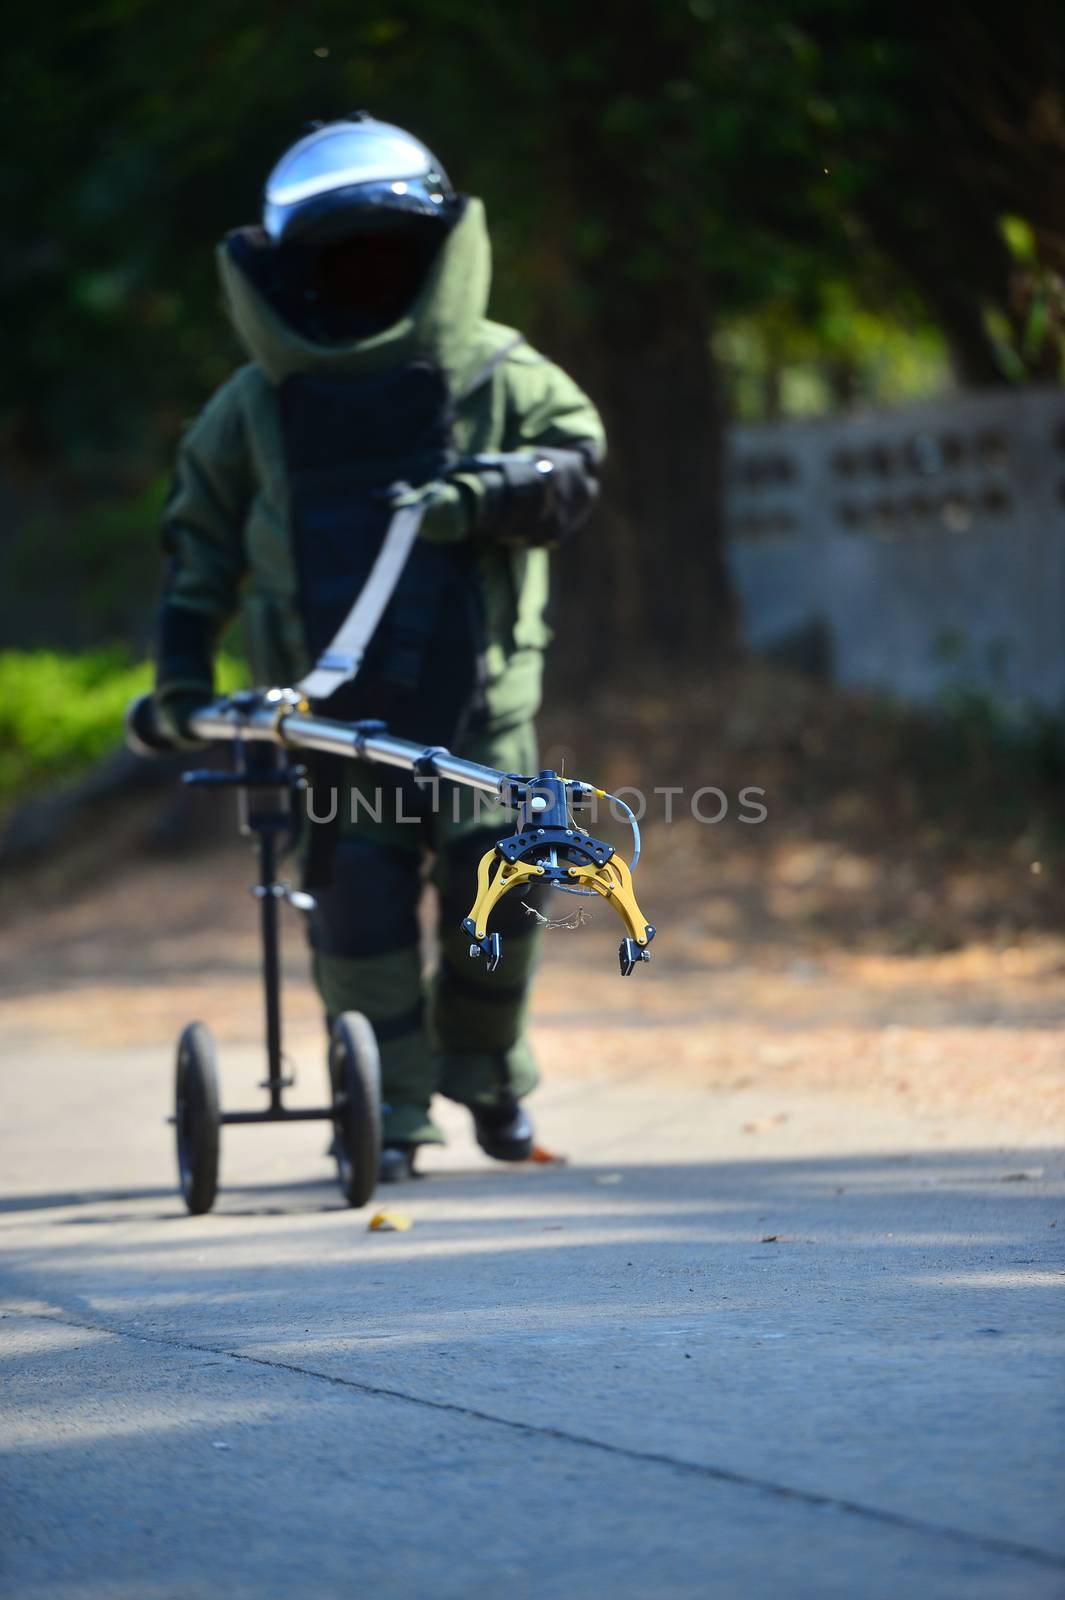 Explosive Ordnance Disposal's officer walking on the road to security check with remote robot hand